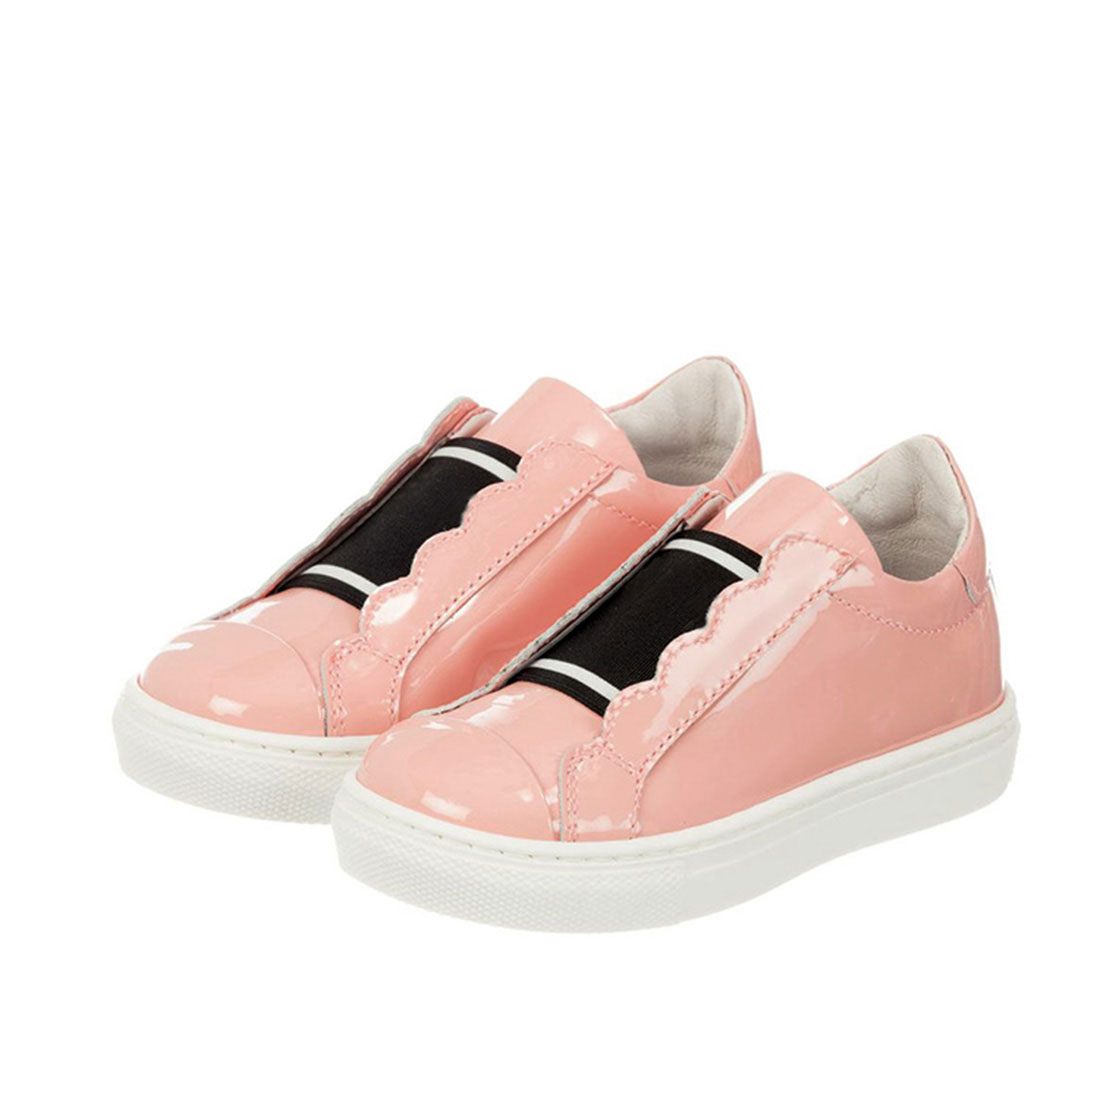 Best patent leather pink flat round toe casual walking rippled edge ...